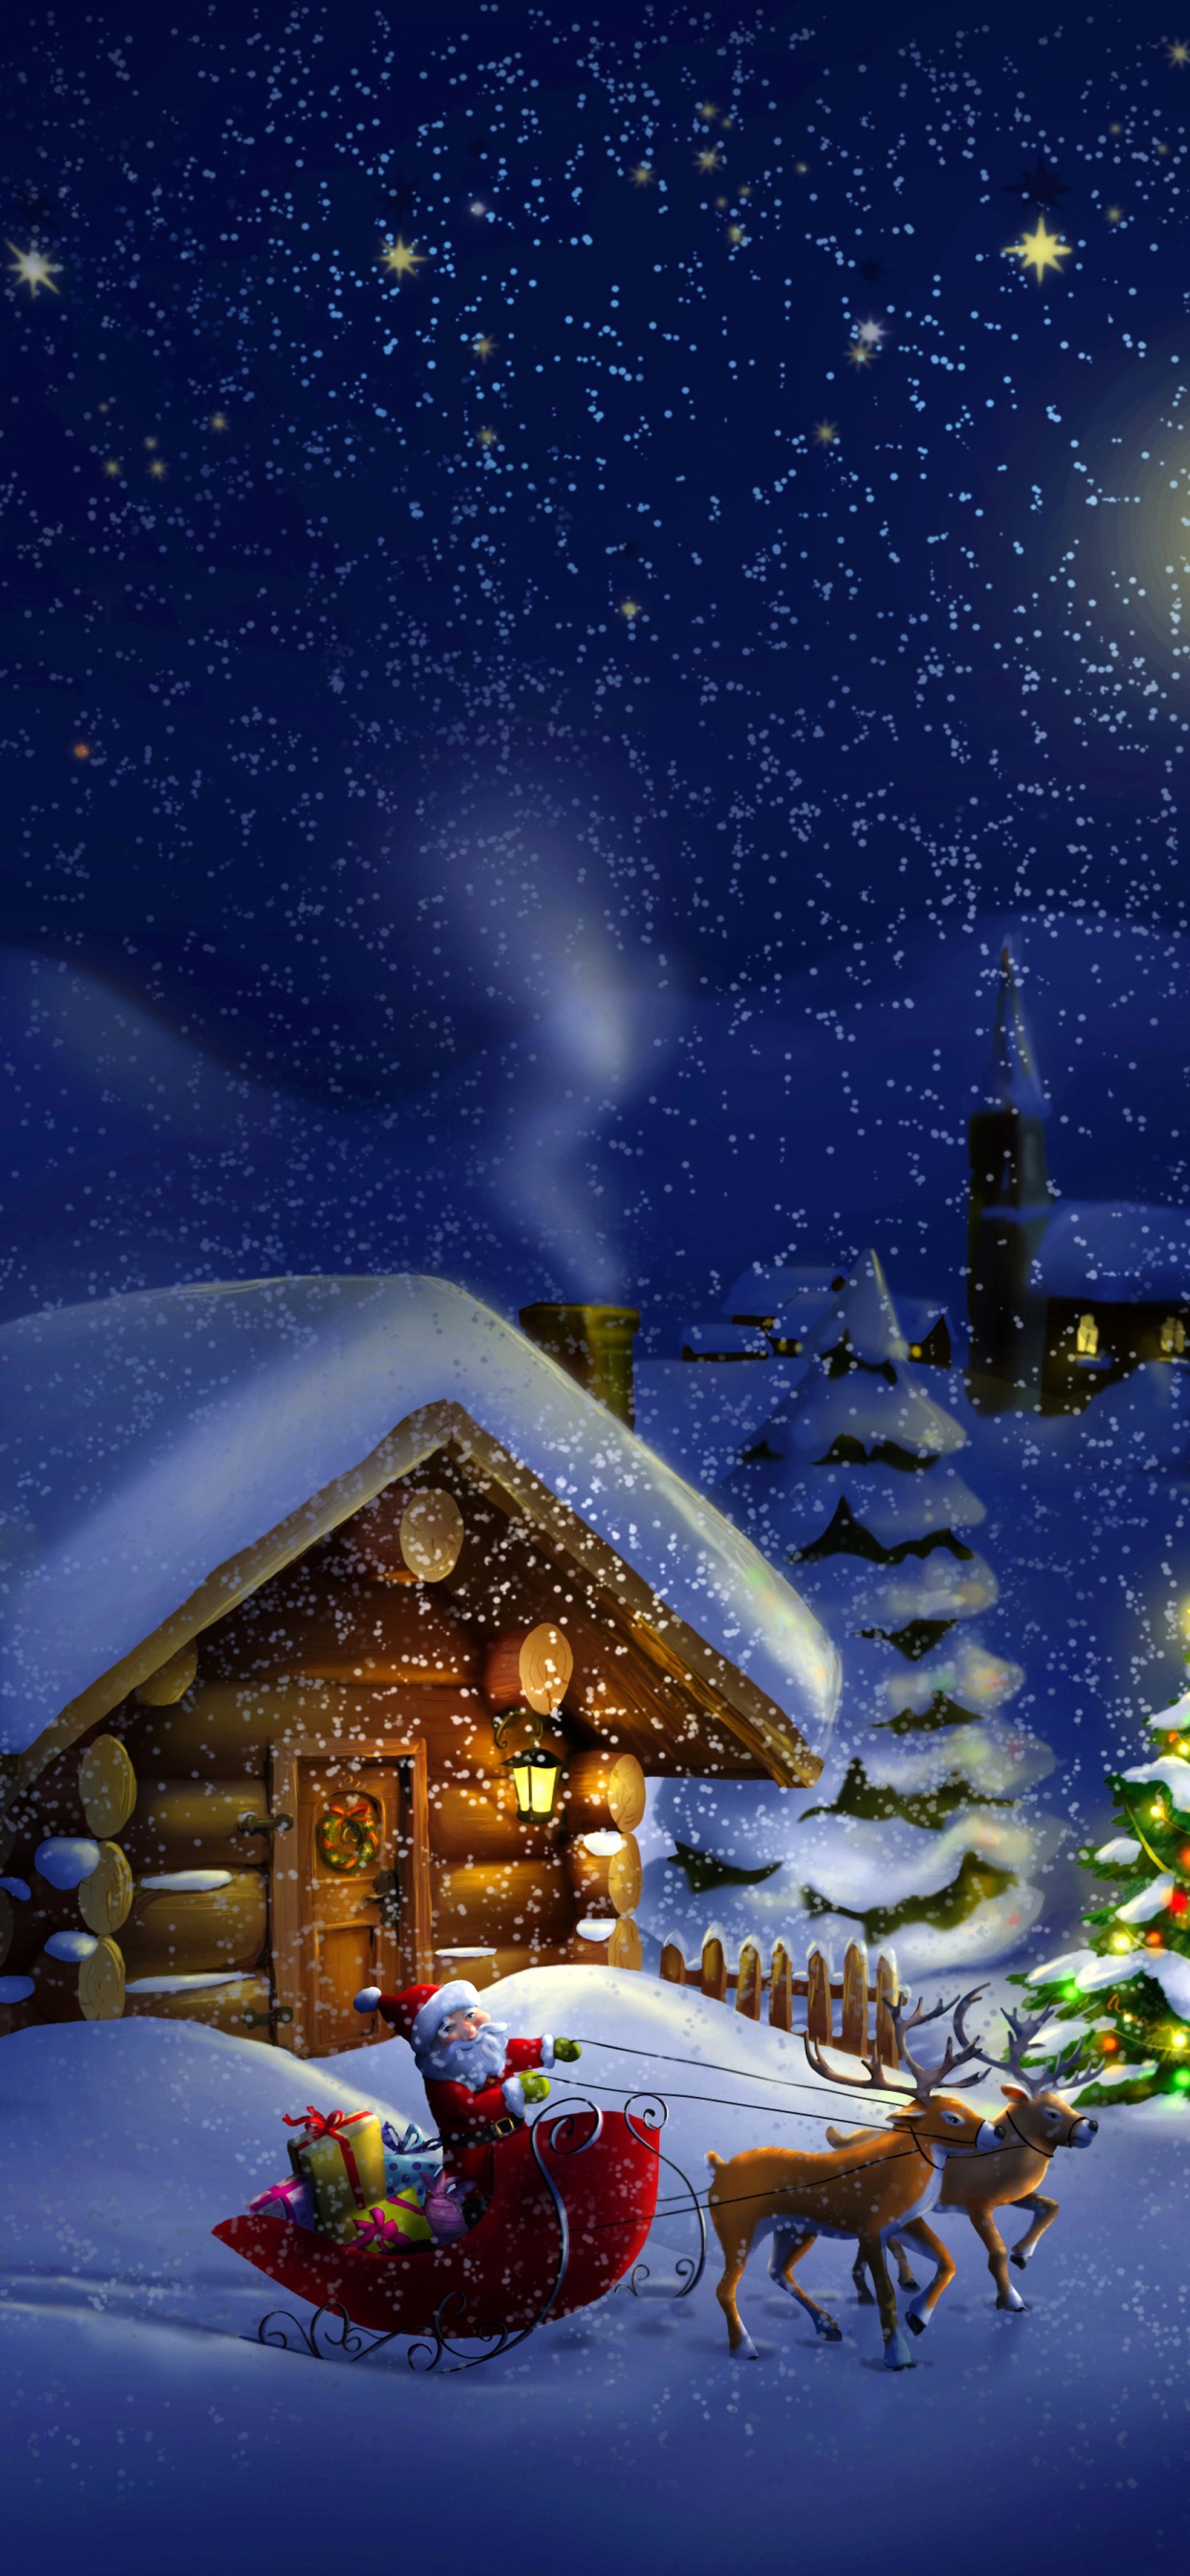 Christmas Day, Santa Claus, Holiday, Winter, Snow. Wallpaper in 1242x2688 Resolution